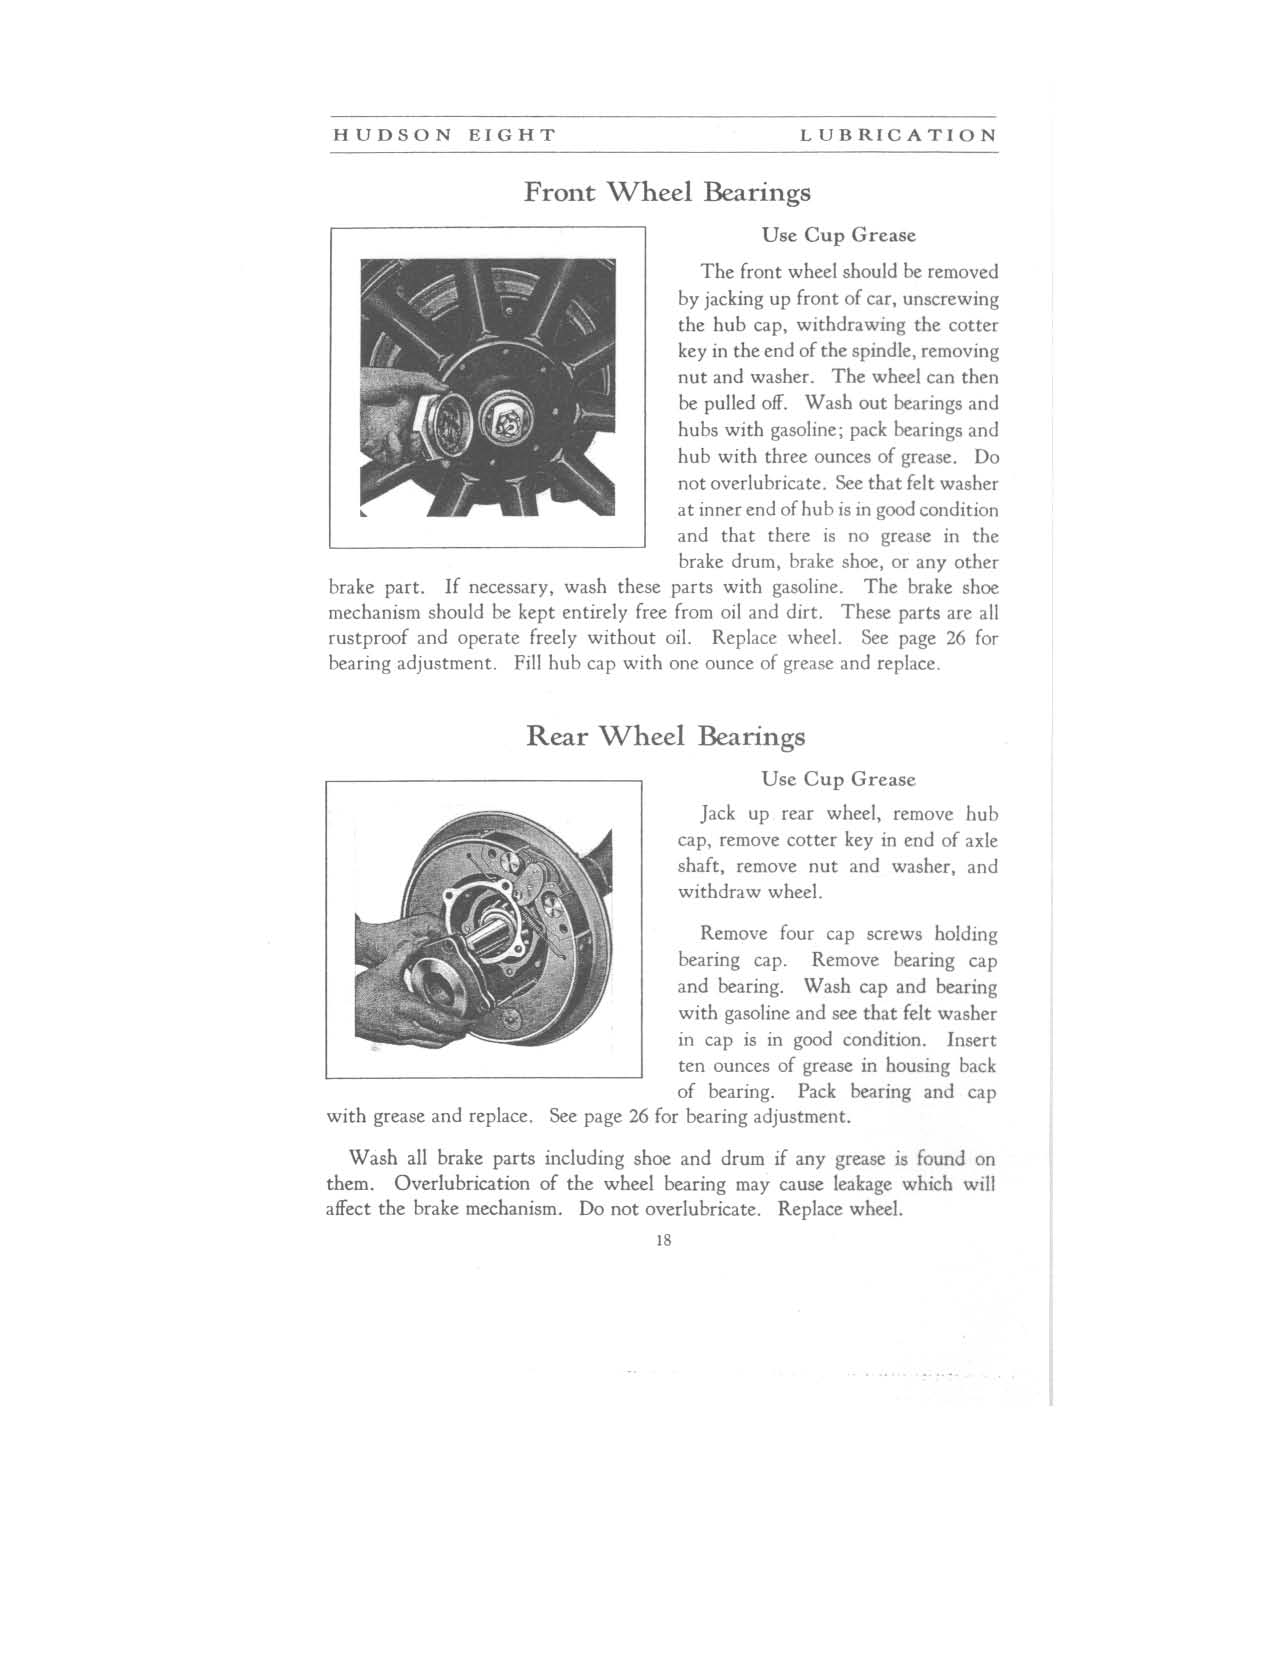 1931 Hudson 8 Instruction Book Page 19